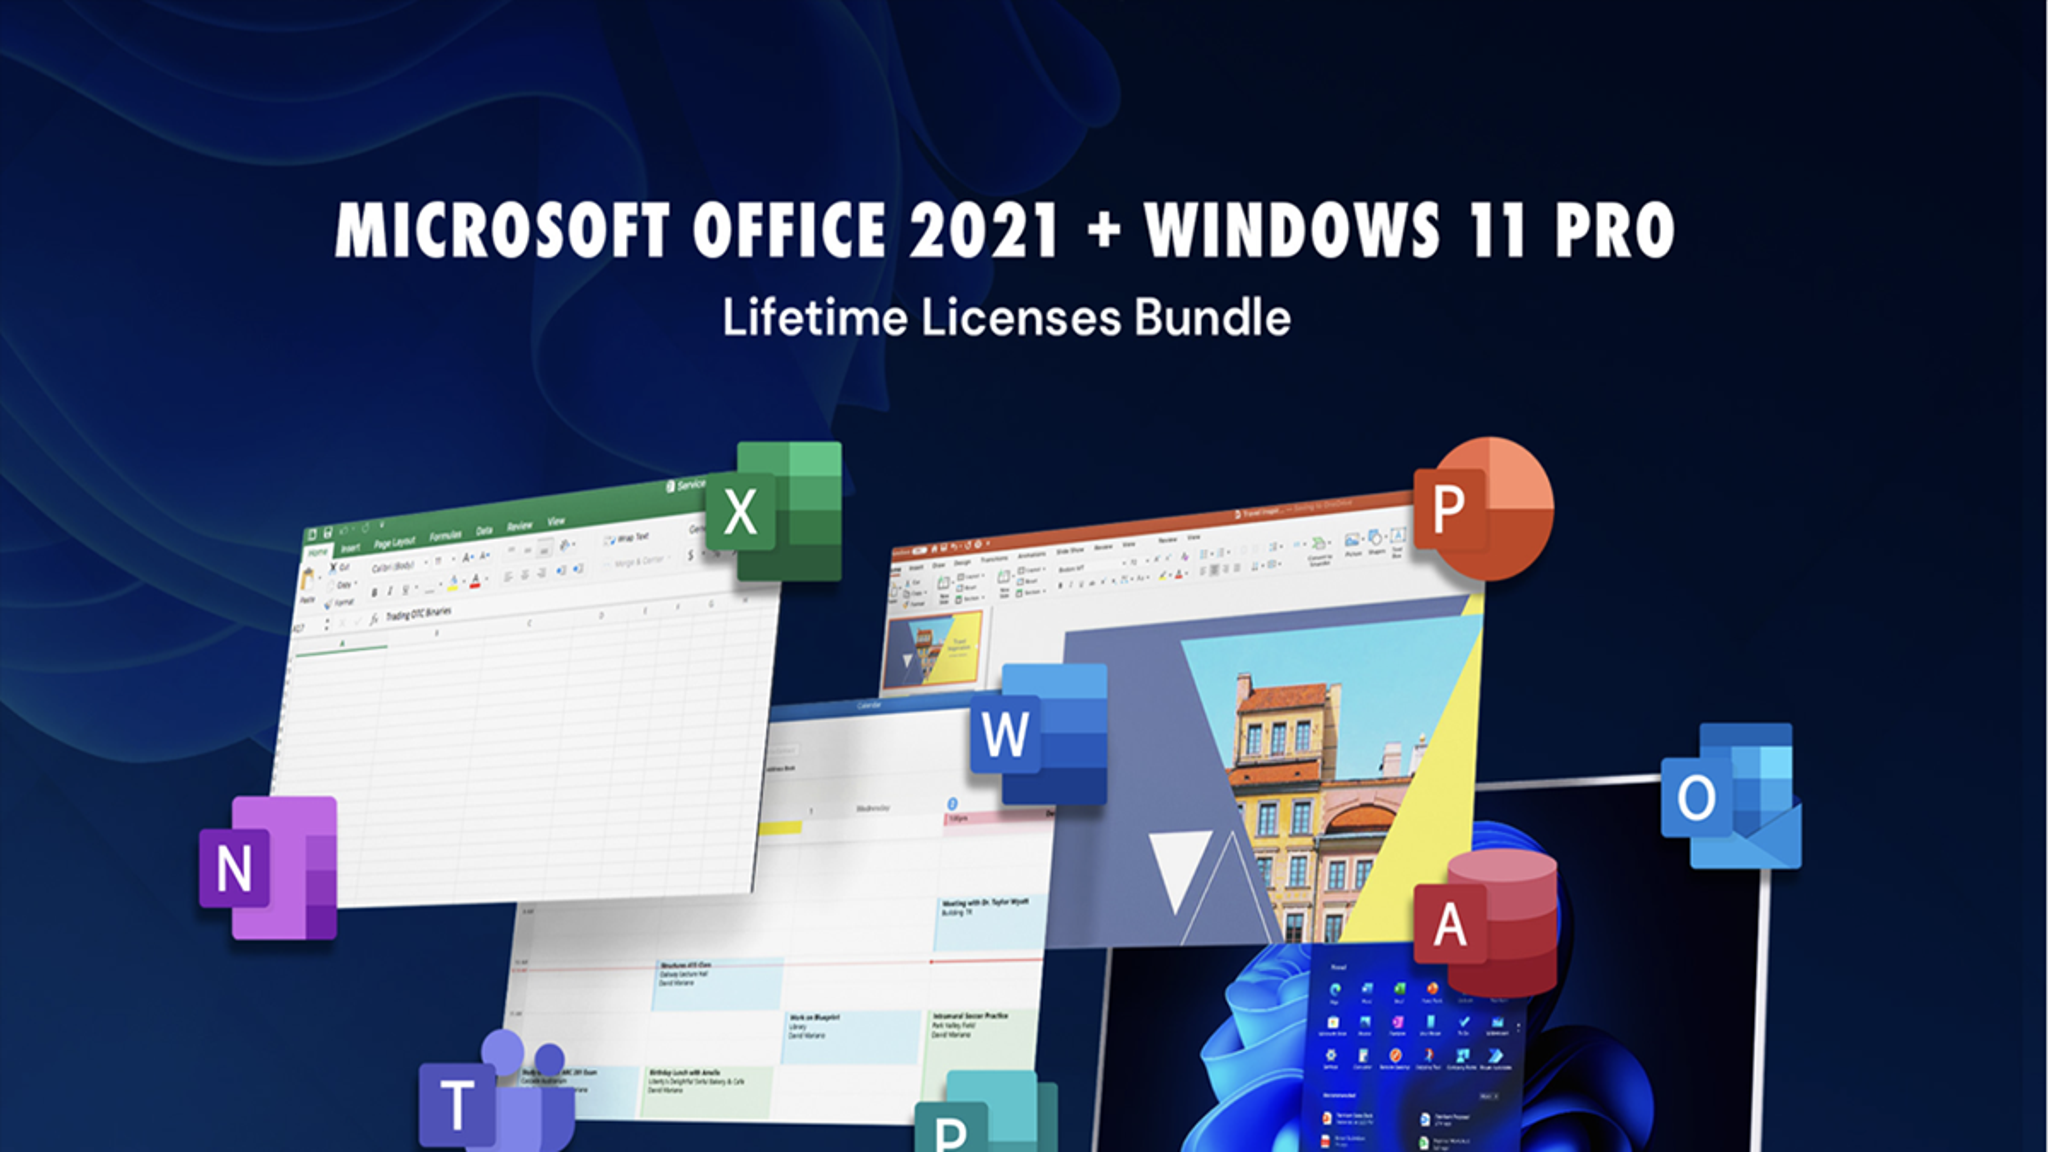 Last chance: Upgrade to Windows 11 Pro and Microsoft Office Pro